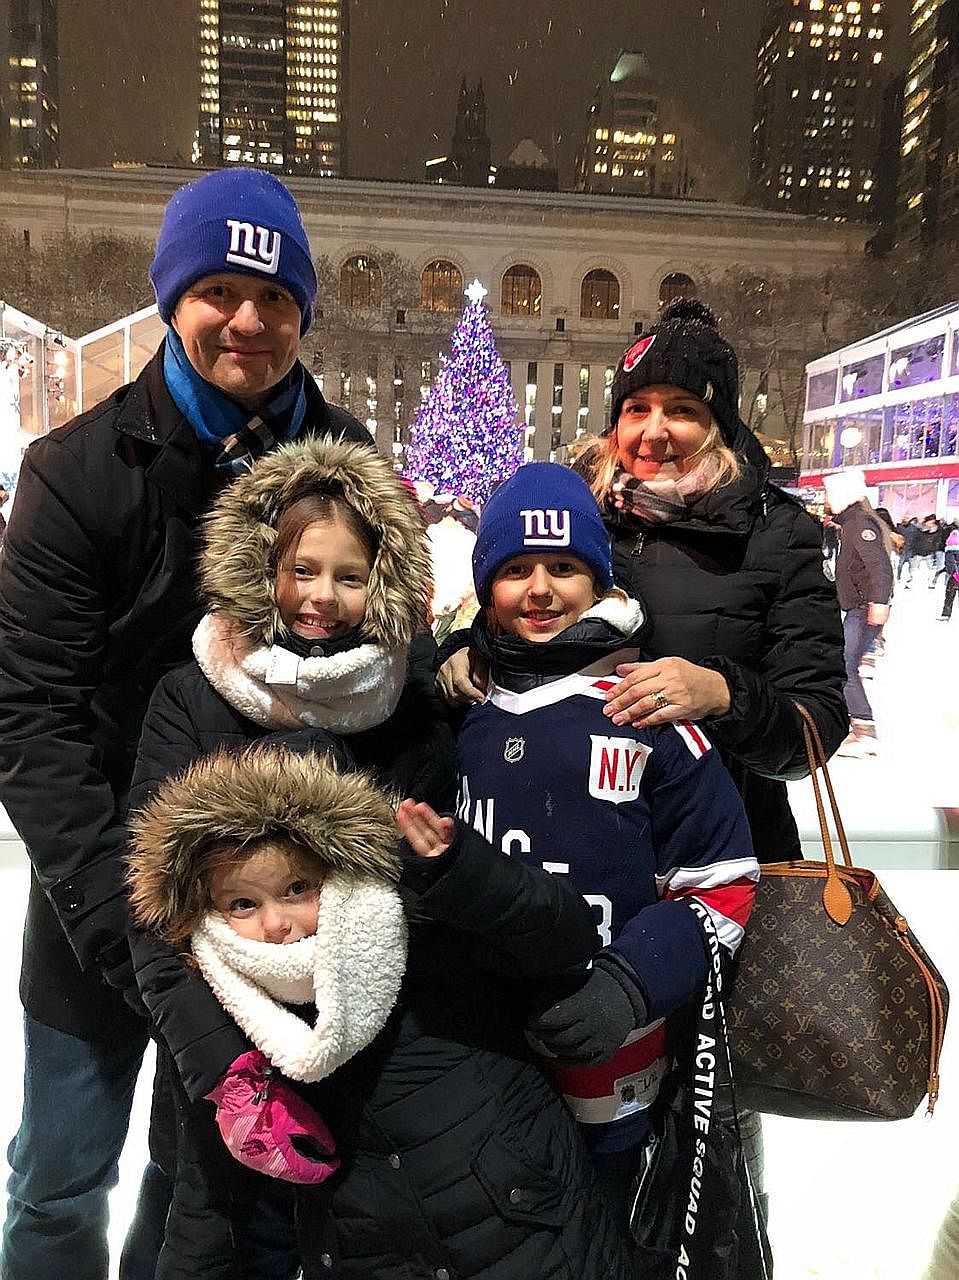 ChildAid star Lilo Baier (second from left) with her family - father Wolfgang Baier, sister Luna, brother Luca and mother Nicole - in New York. Lilo performed in the prestigious Carnegie Hall on Dec 16, singing to a sold-out audience How Far I'll Go,